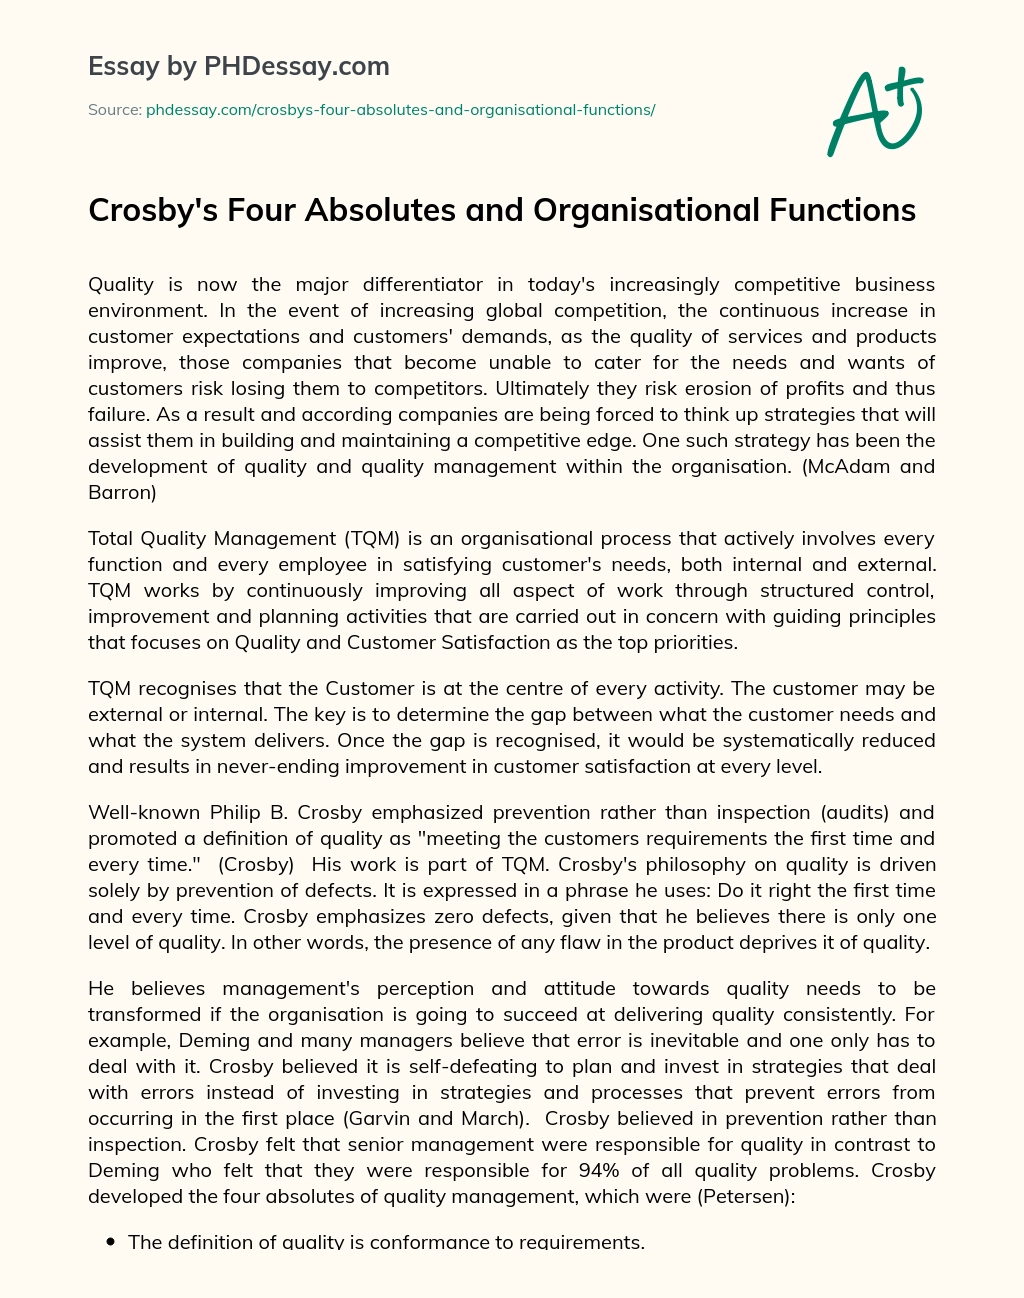 Crosby’s Four Absolutes and Organisational Functions essay